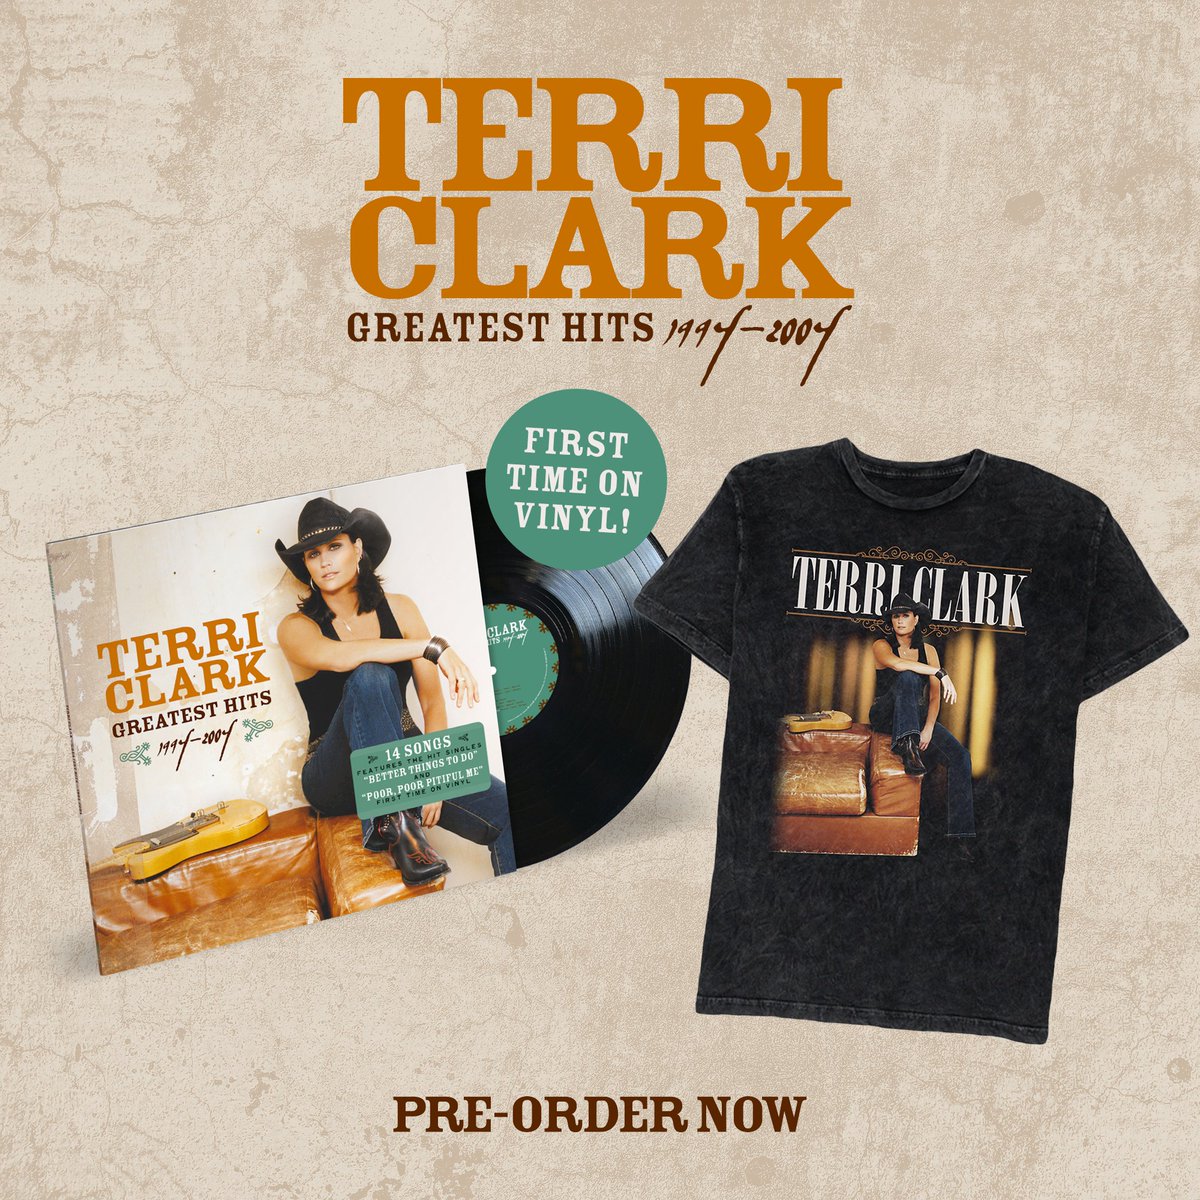 I'm so excited to celebrate the 20th anniversary of my Greatest Hits album in a NEW way! For the first time ever, it will be released on vinyl... and I can't wait to hear it spinning! It's available everywhere May 31, but you can pre-order your copy now. terriclark.lnk.to/GreatestHits…